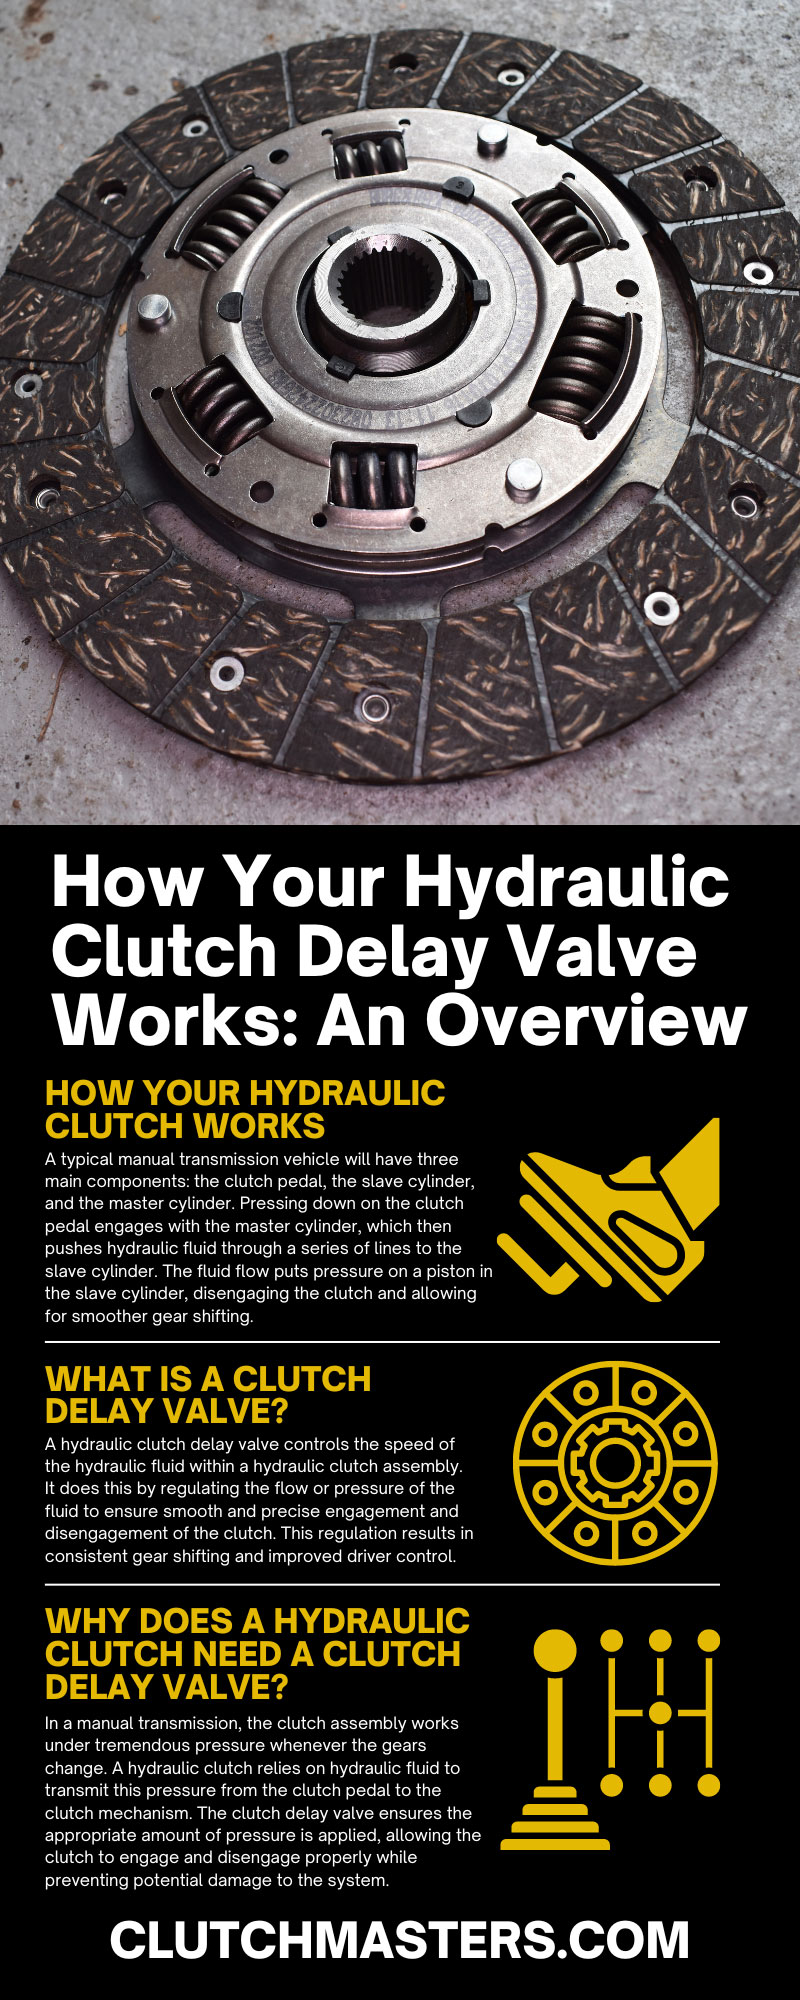 How Your Hydraulic Clutch Delay Valve Works: An Overview